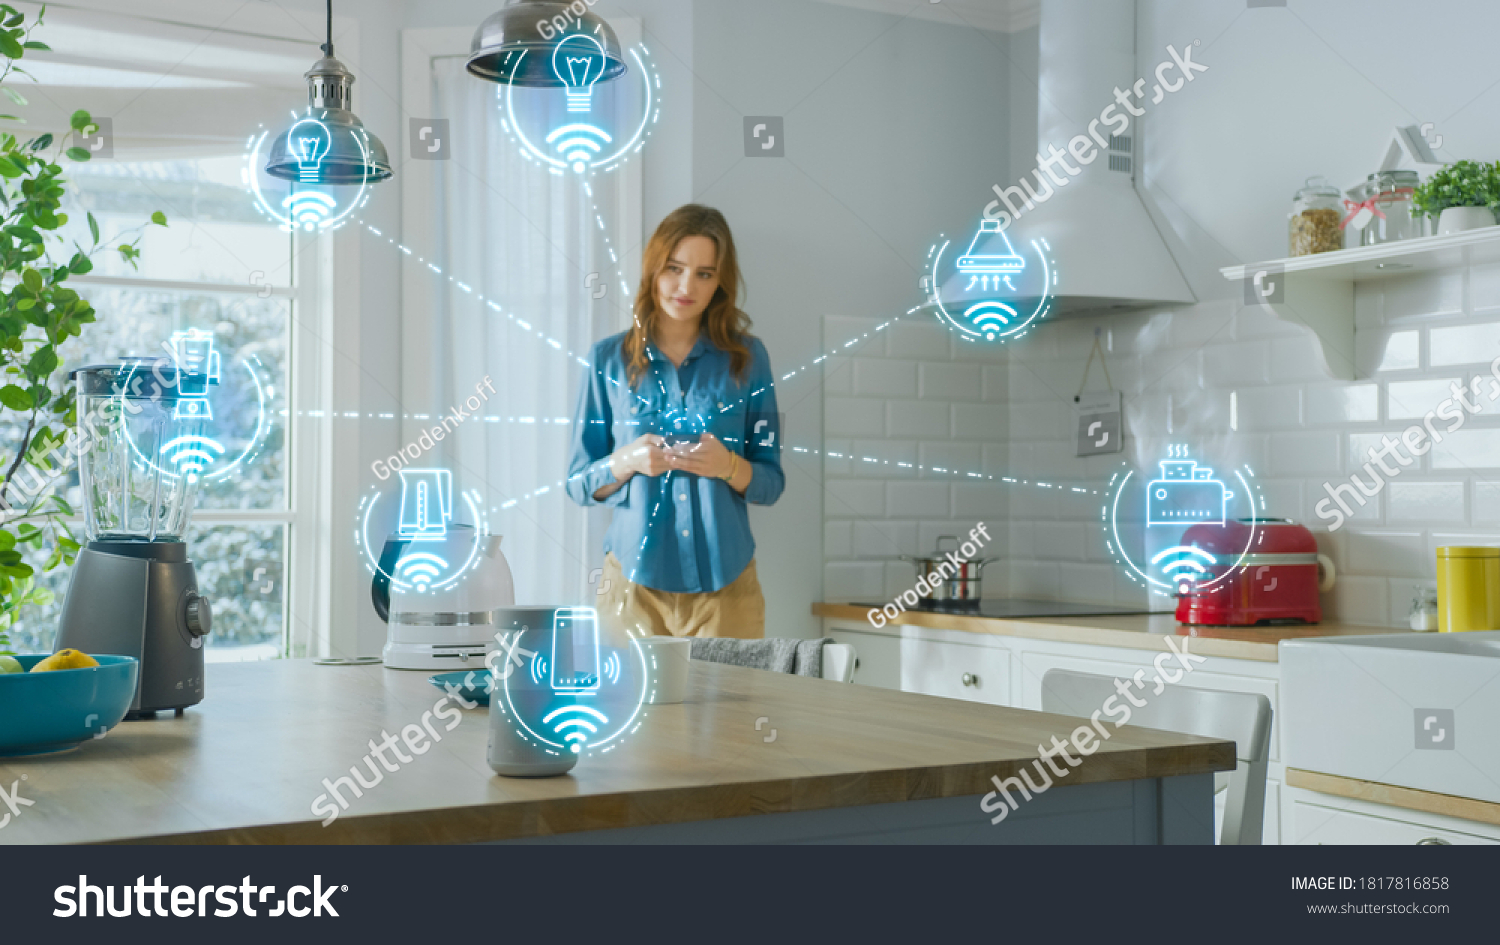 Internet of Things Concept: Young Woman Using Smartphone in Kitchen. She controls her Kitchen Appliances with IOT. Graphics Showing Digitalization Visualization of Connected Home Electronics Devices #1817816858